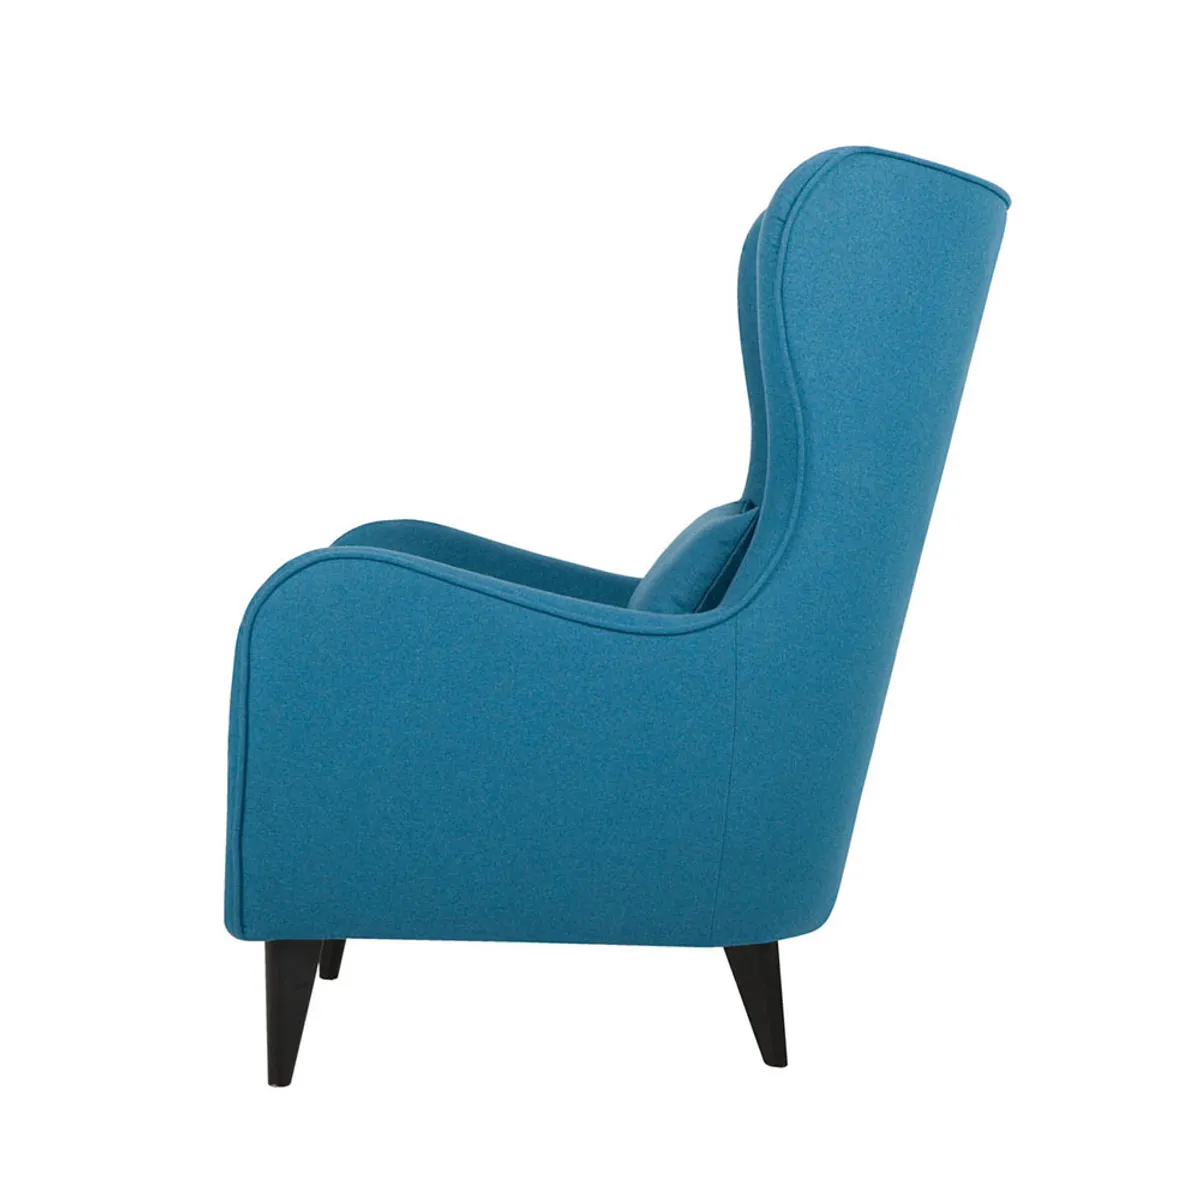 Aurland High Back Wing Back Chair Panno2240 Turquoise 033